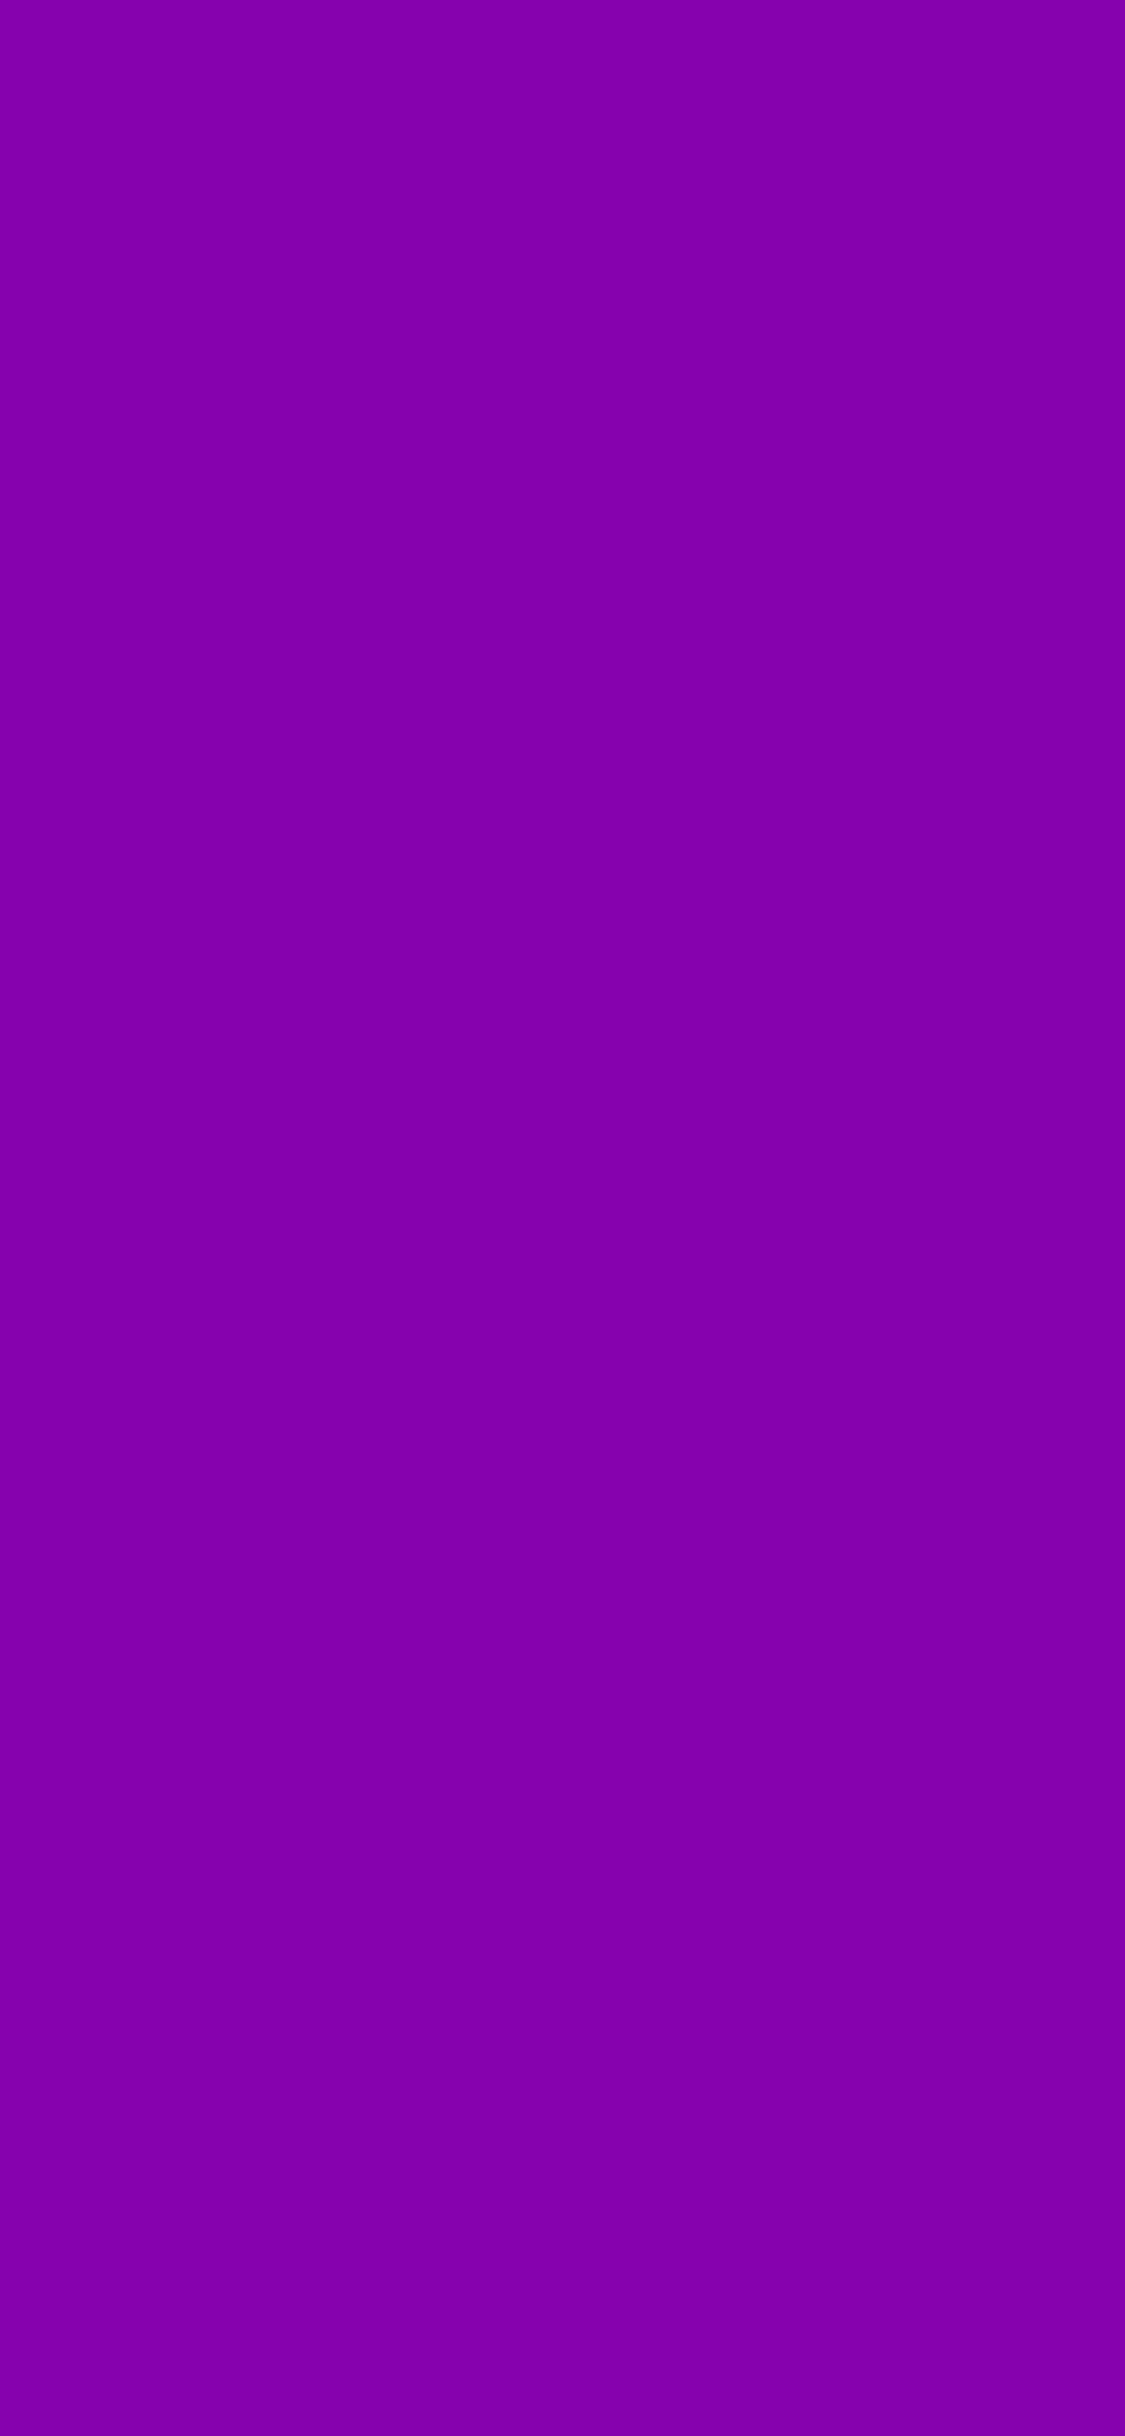 1125x2436 Violet RYB Solid Color Background